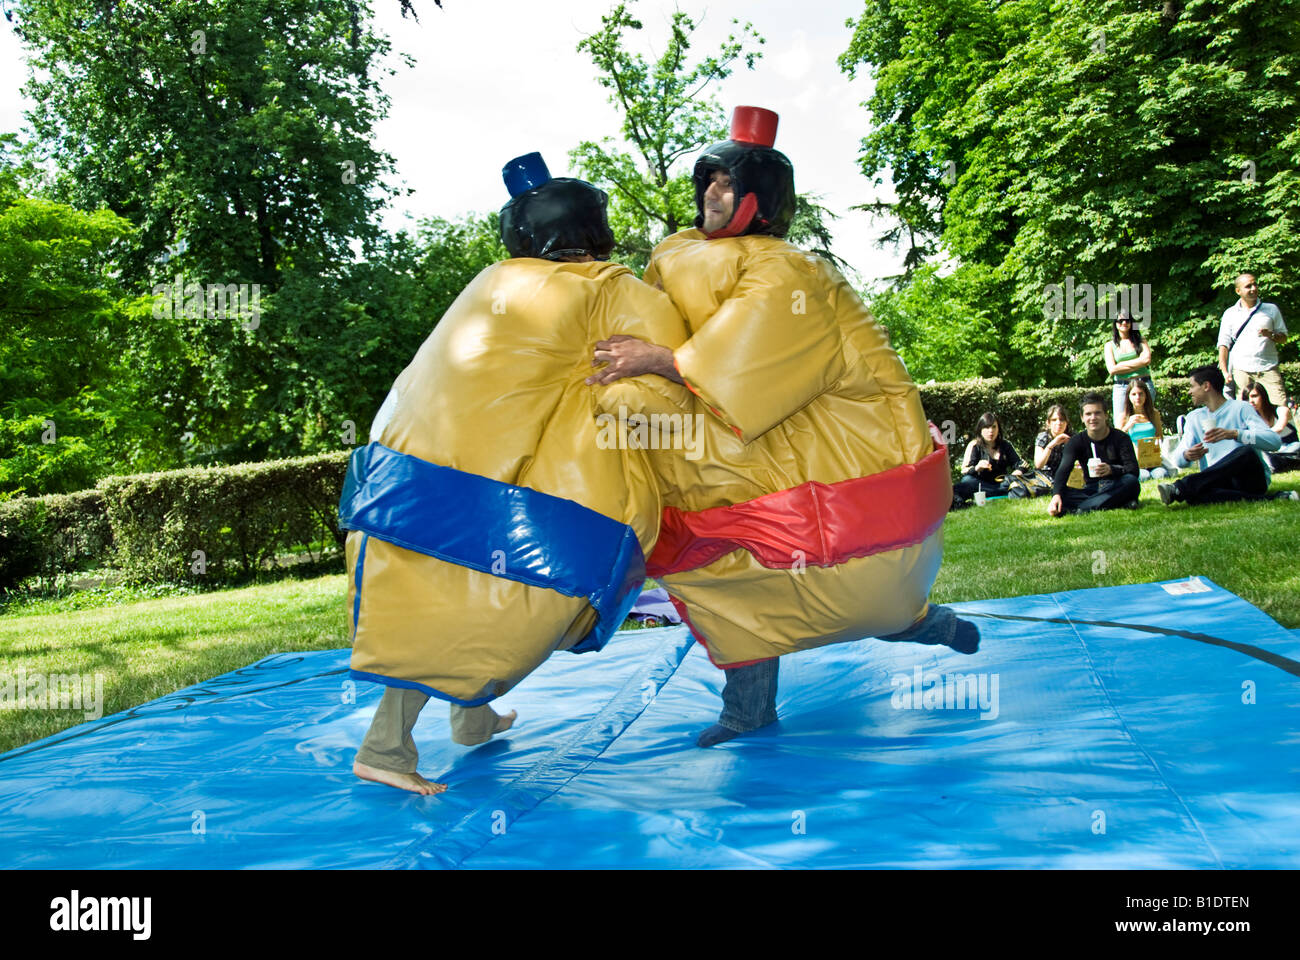 Paris France, 'Public Parks' Young People Watching Two 'Sumo Wrestlers' in Costume Fighting Outside in 'Parc de Vincennes' Stock Photo